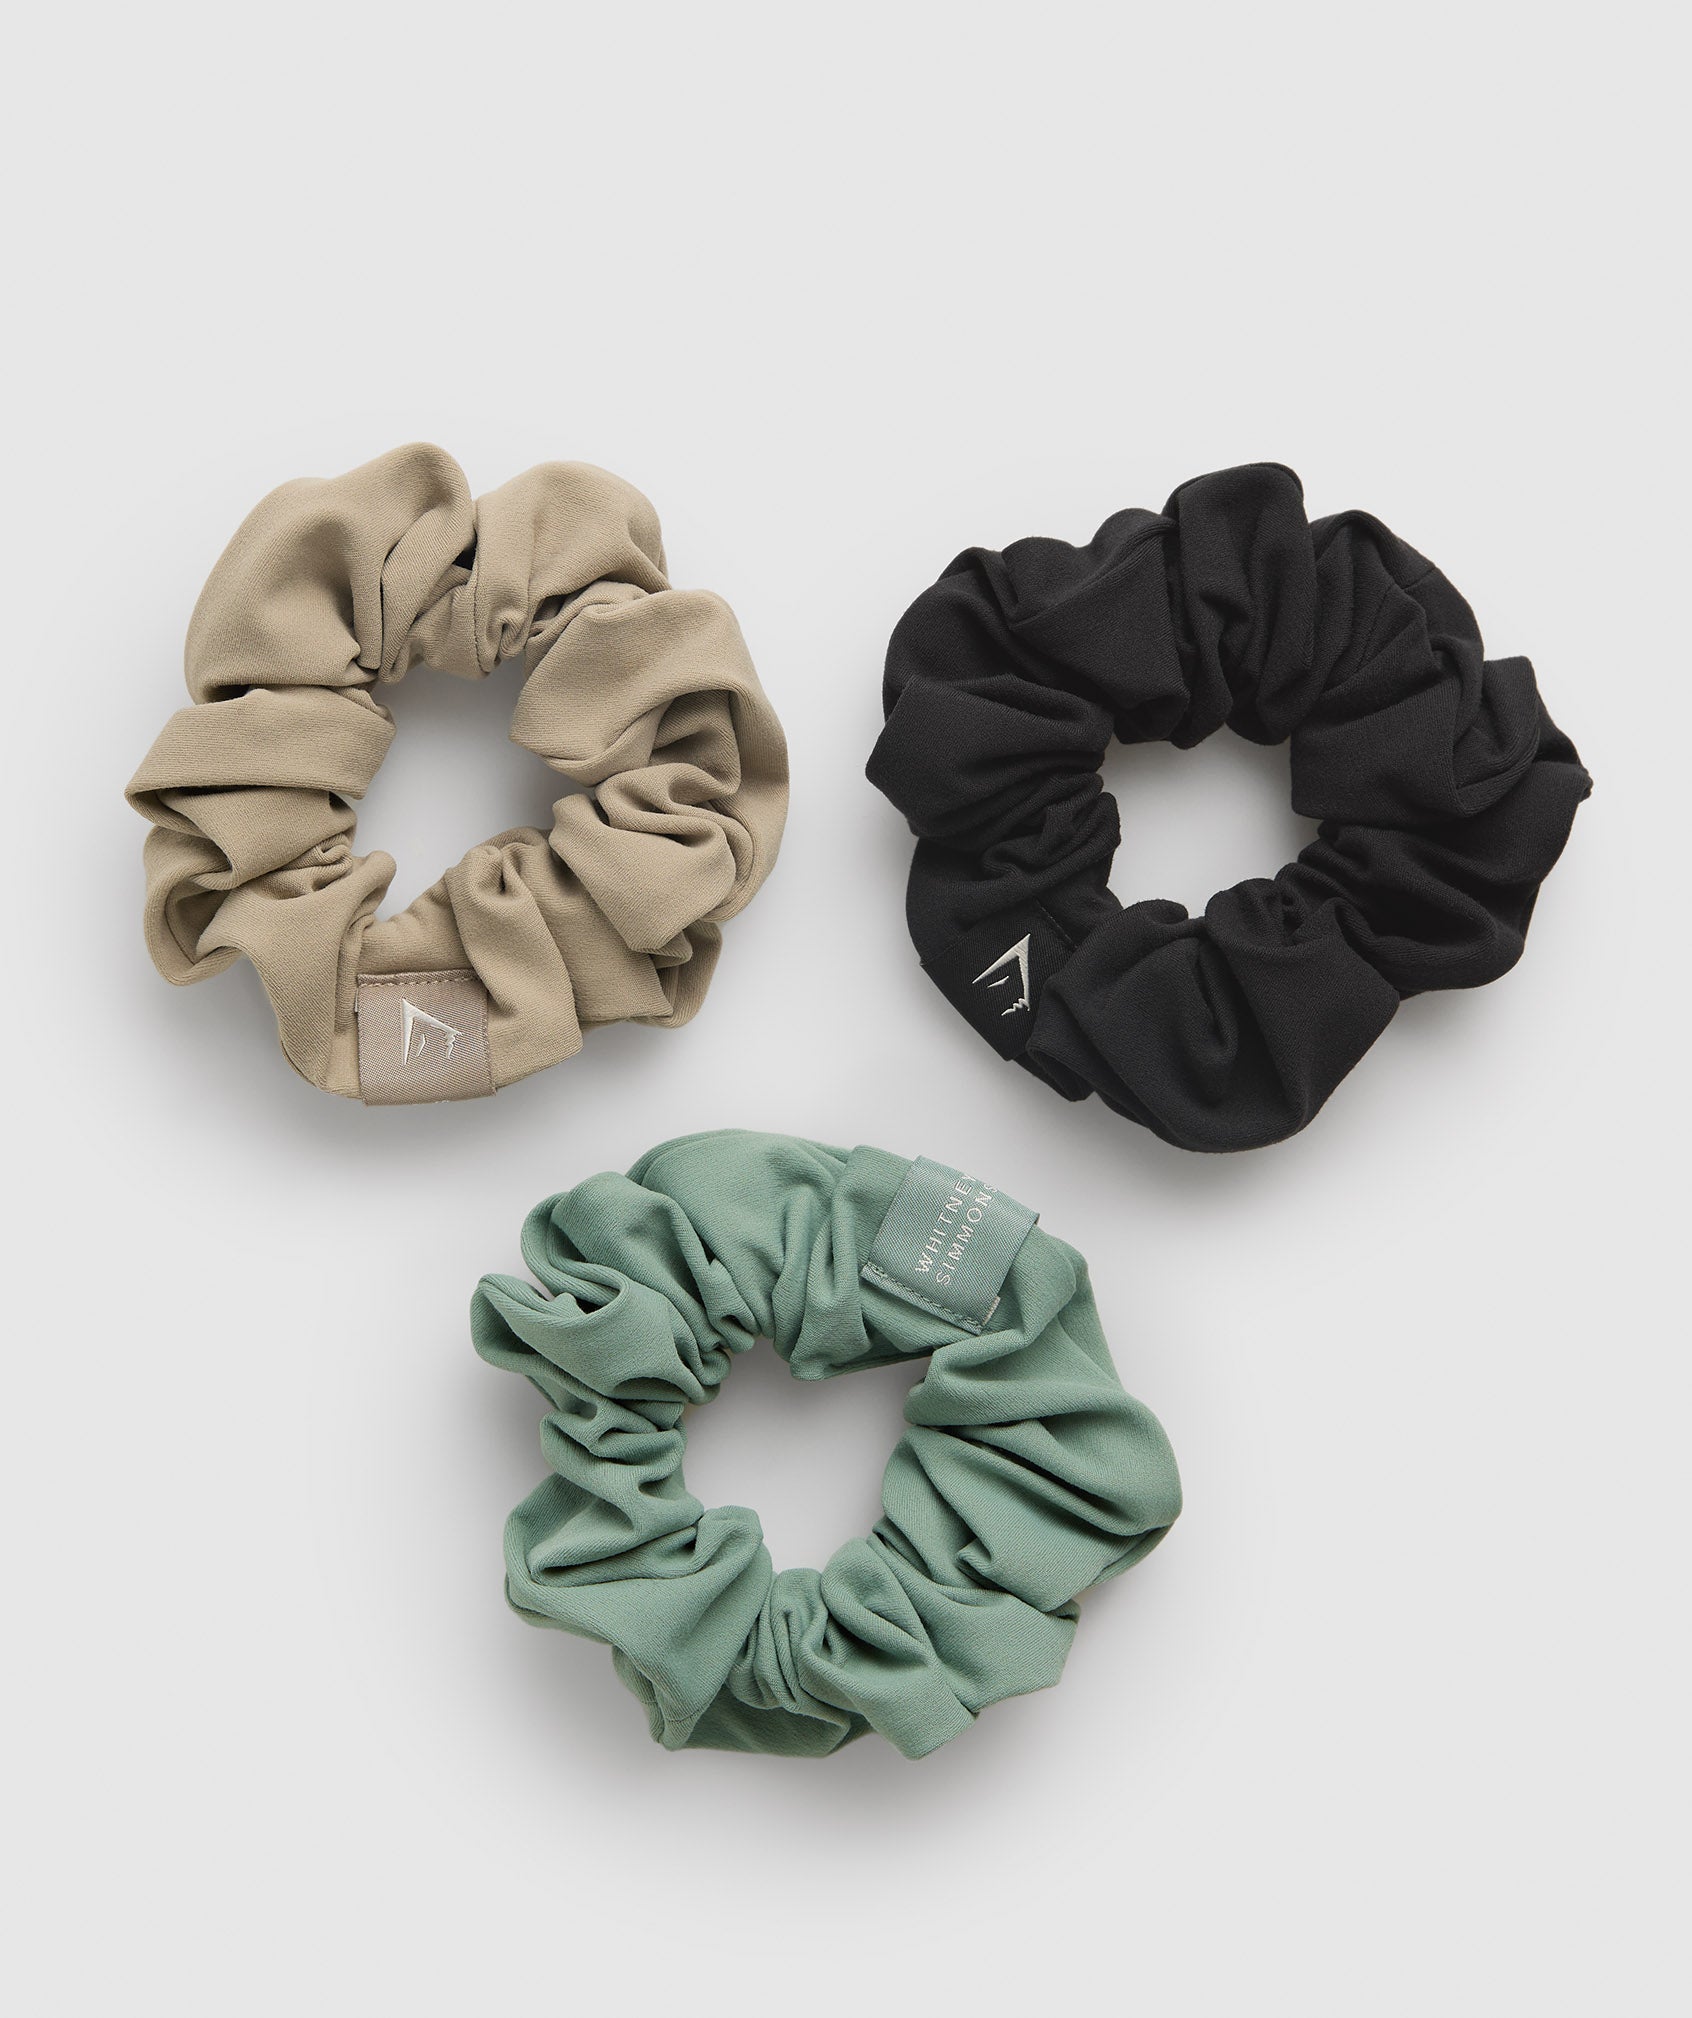 Whitney Scrunchies 3PK in Black/Cement Brown/Leaf Green - view 1